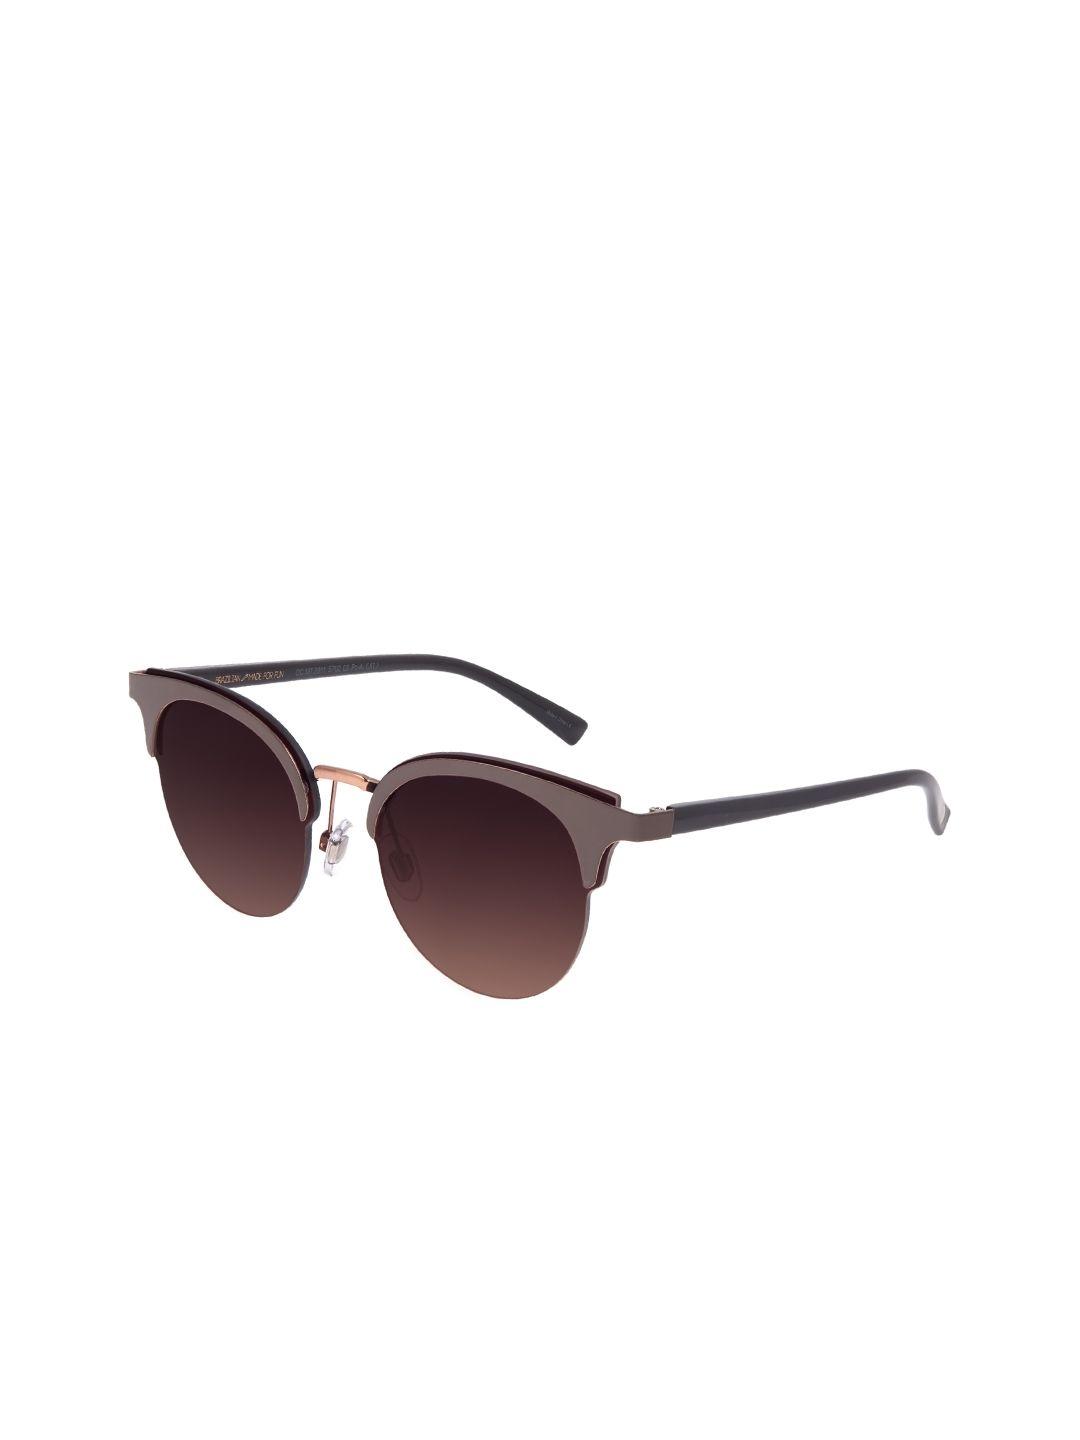 chilli-beans-women-round-sunglasses-with-uv-protected-lens